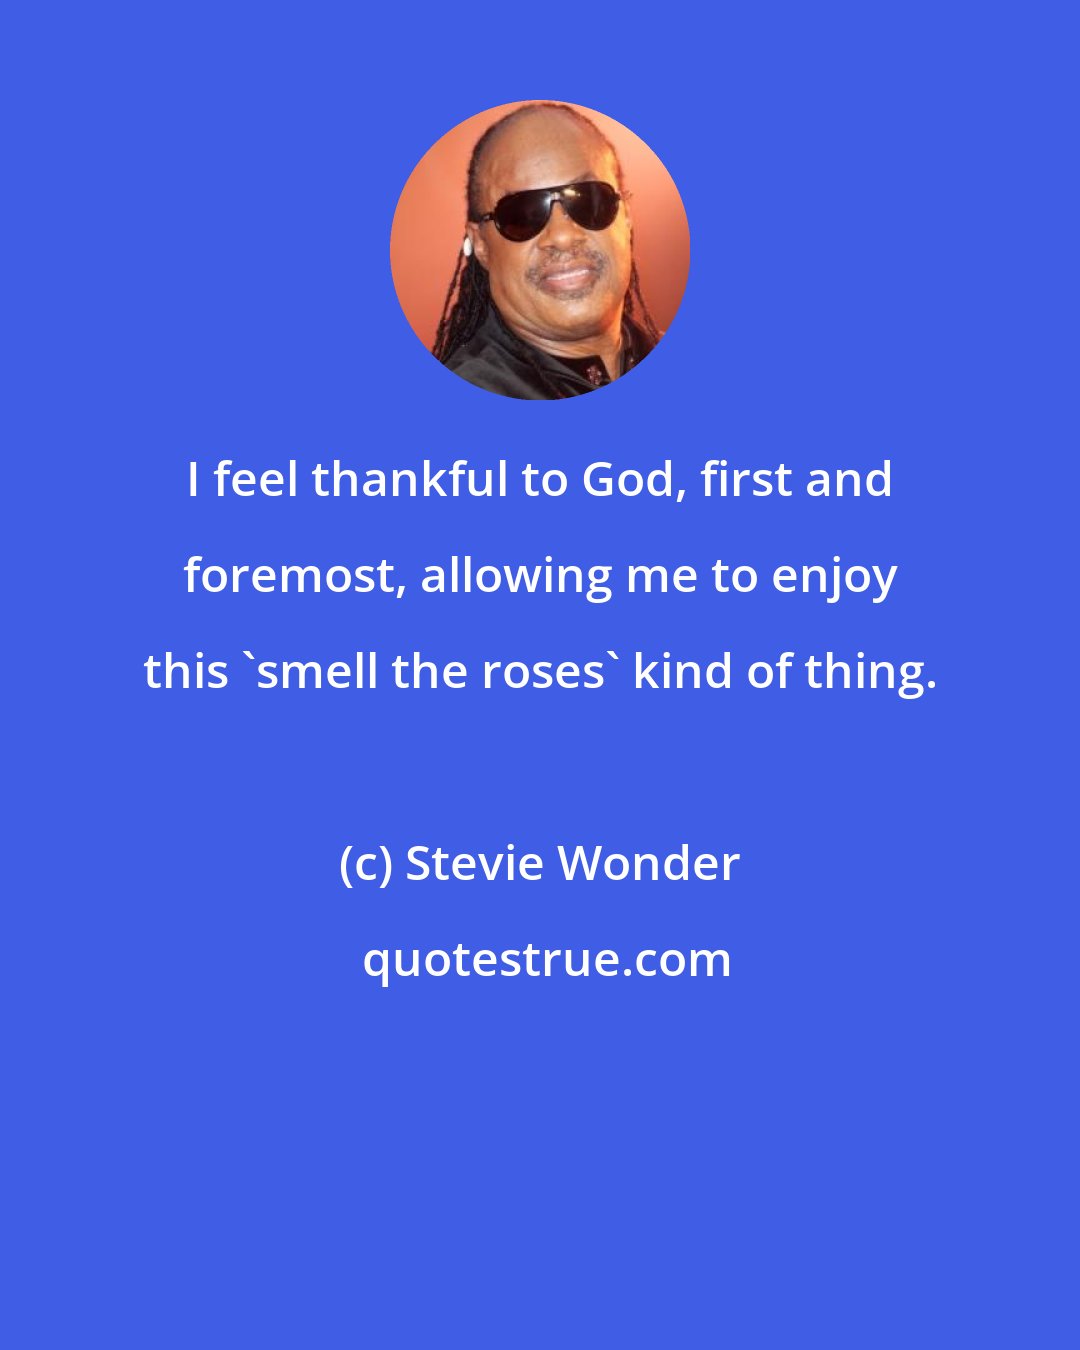 Stevie Wonder: I feel thankful to God, first and foremost, allowing me to enjoy this 'smell the roses' kind of thing.